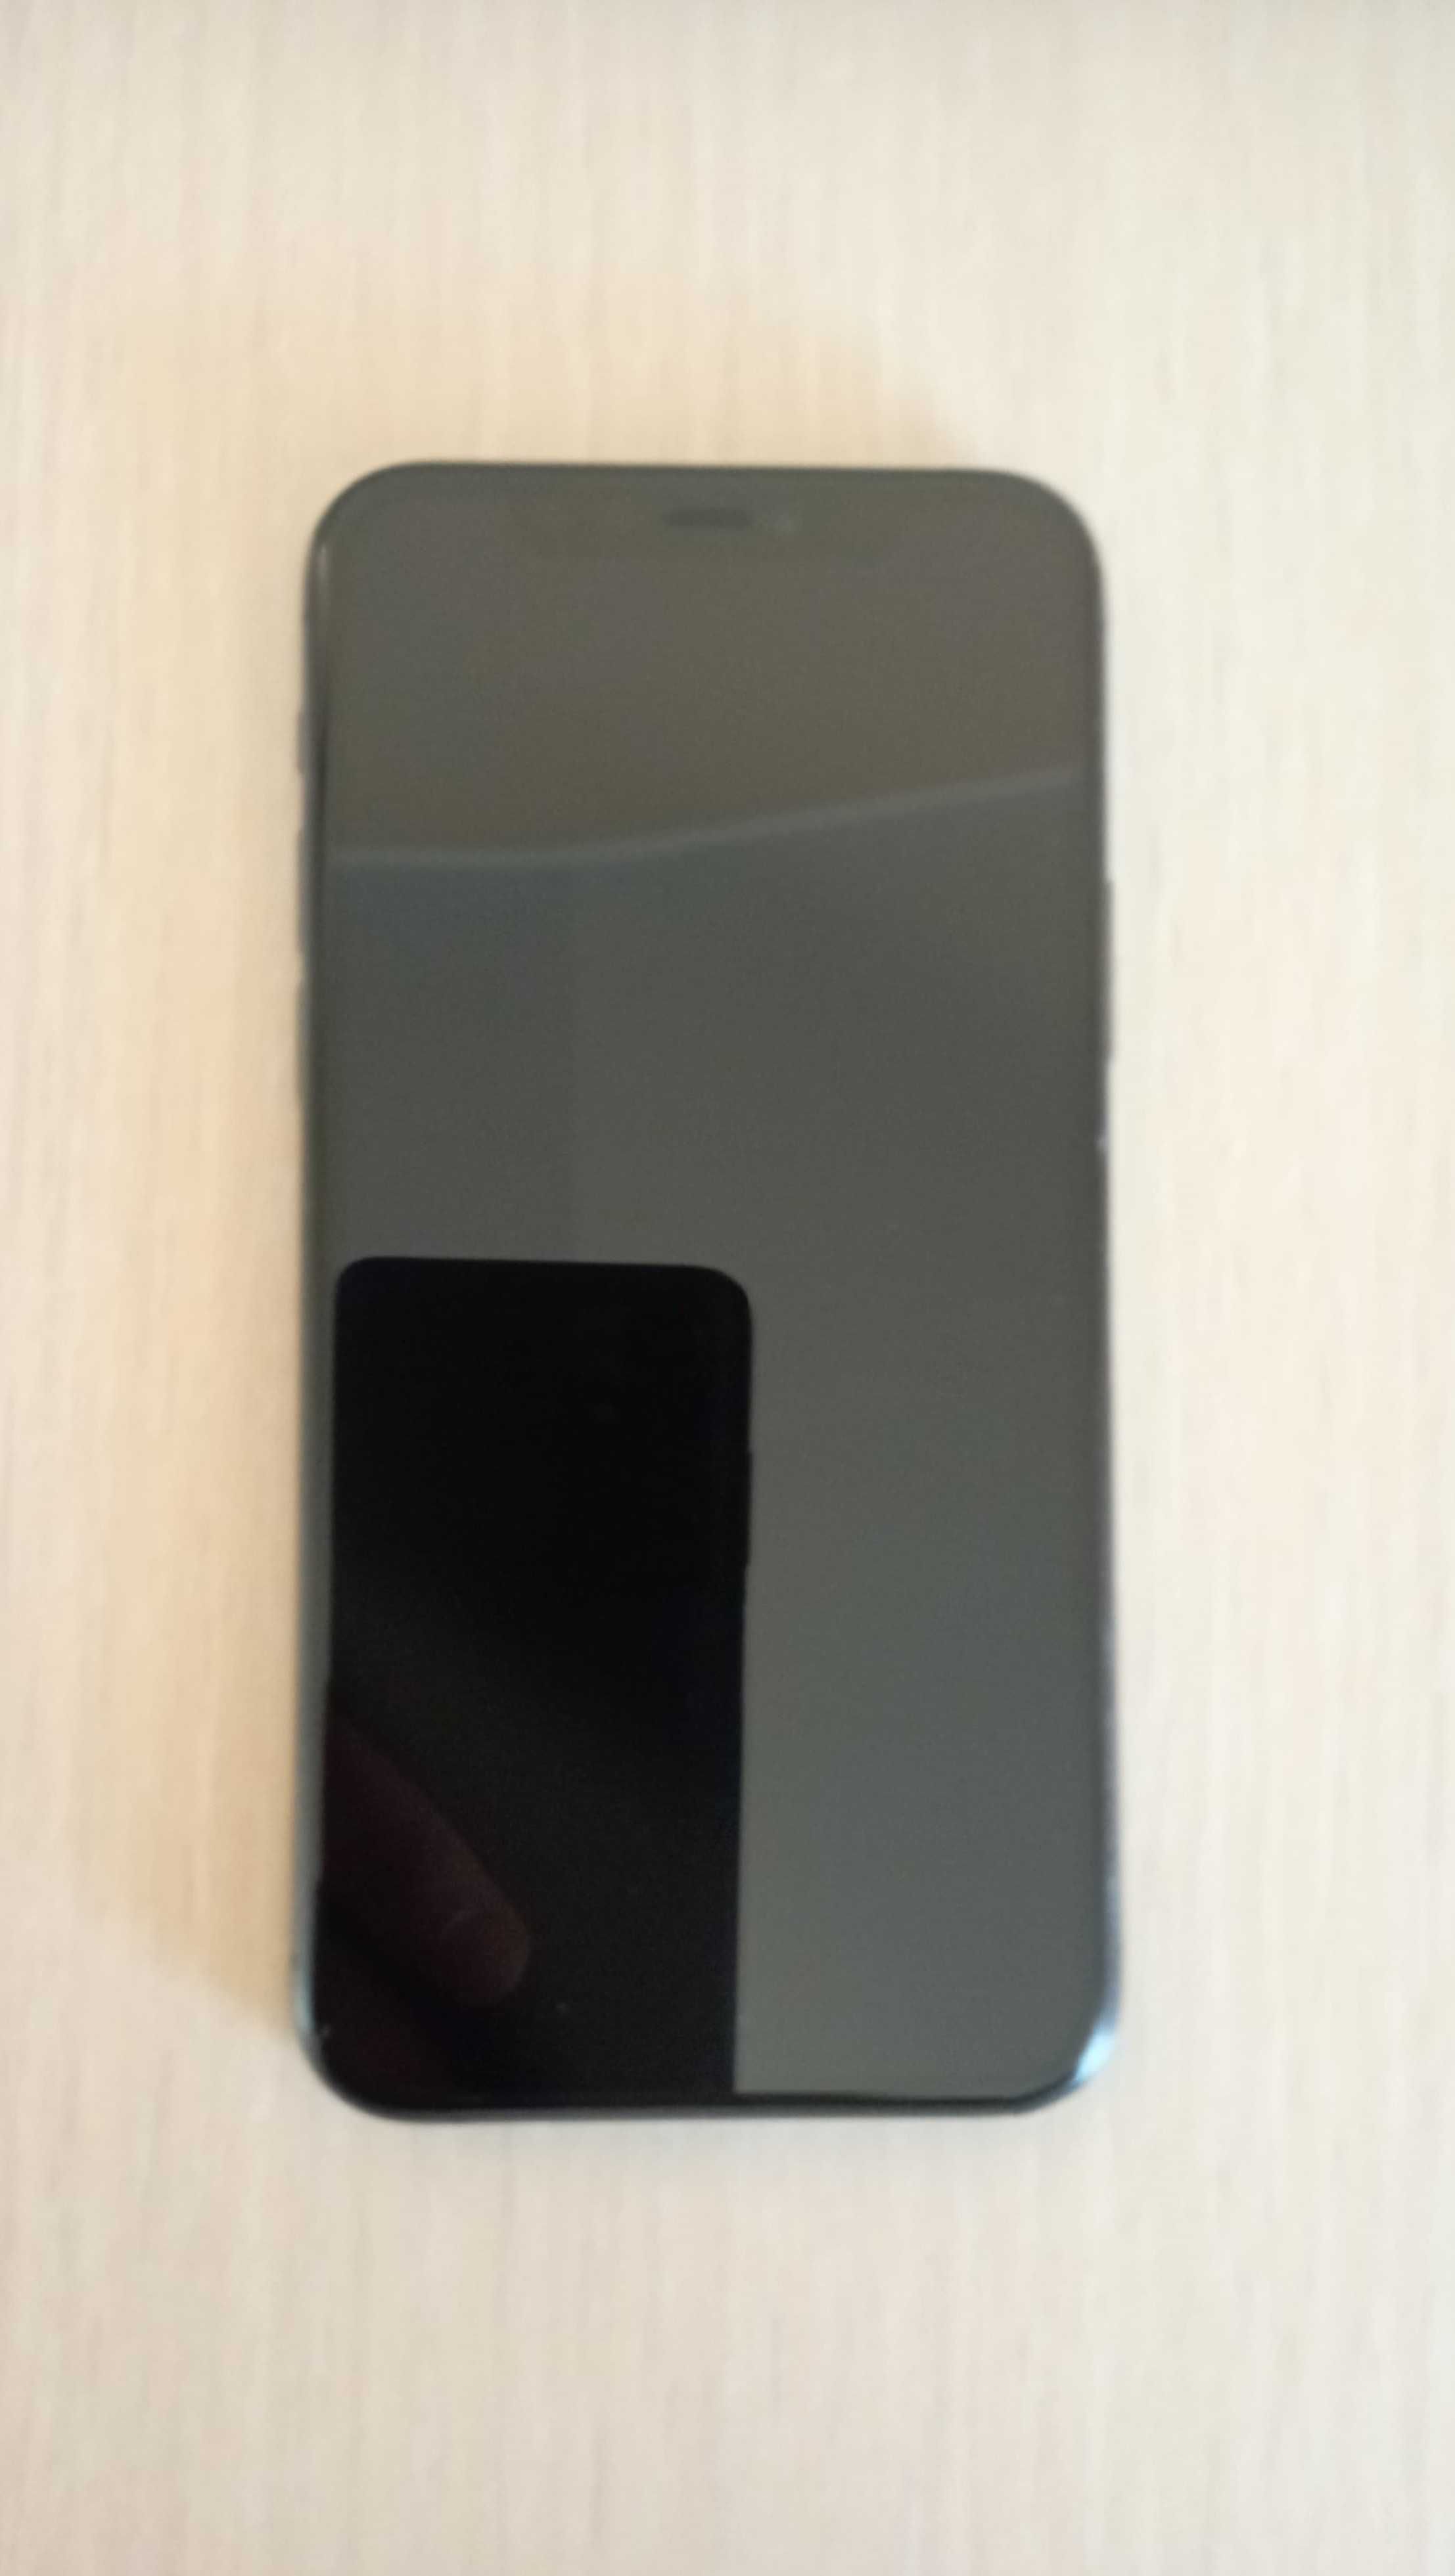 iPhone 11 Pro, 64GB, Space Gray